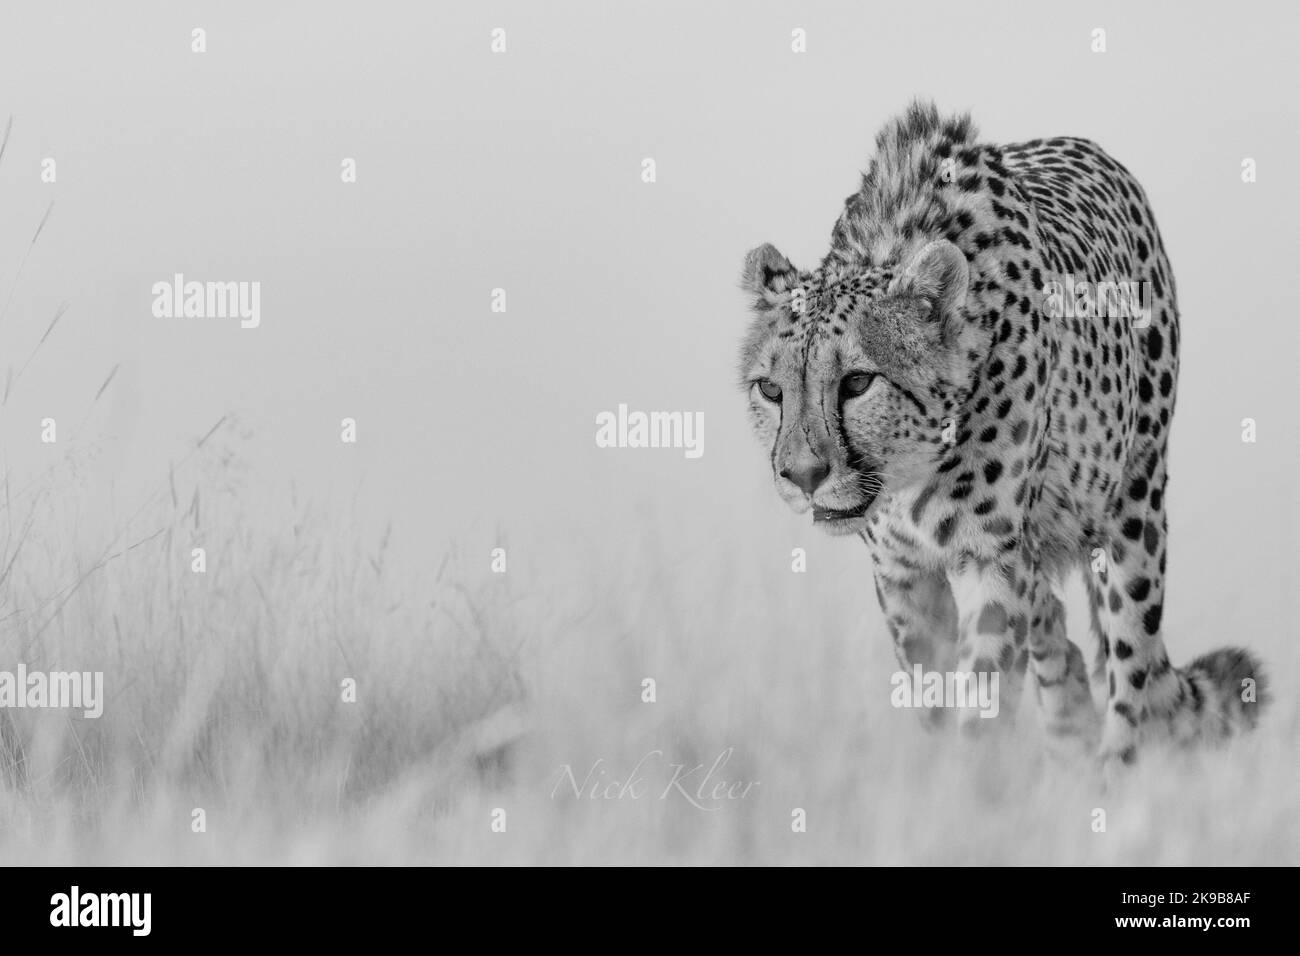 A cheetah on a hunt Stock Photo